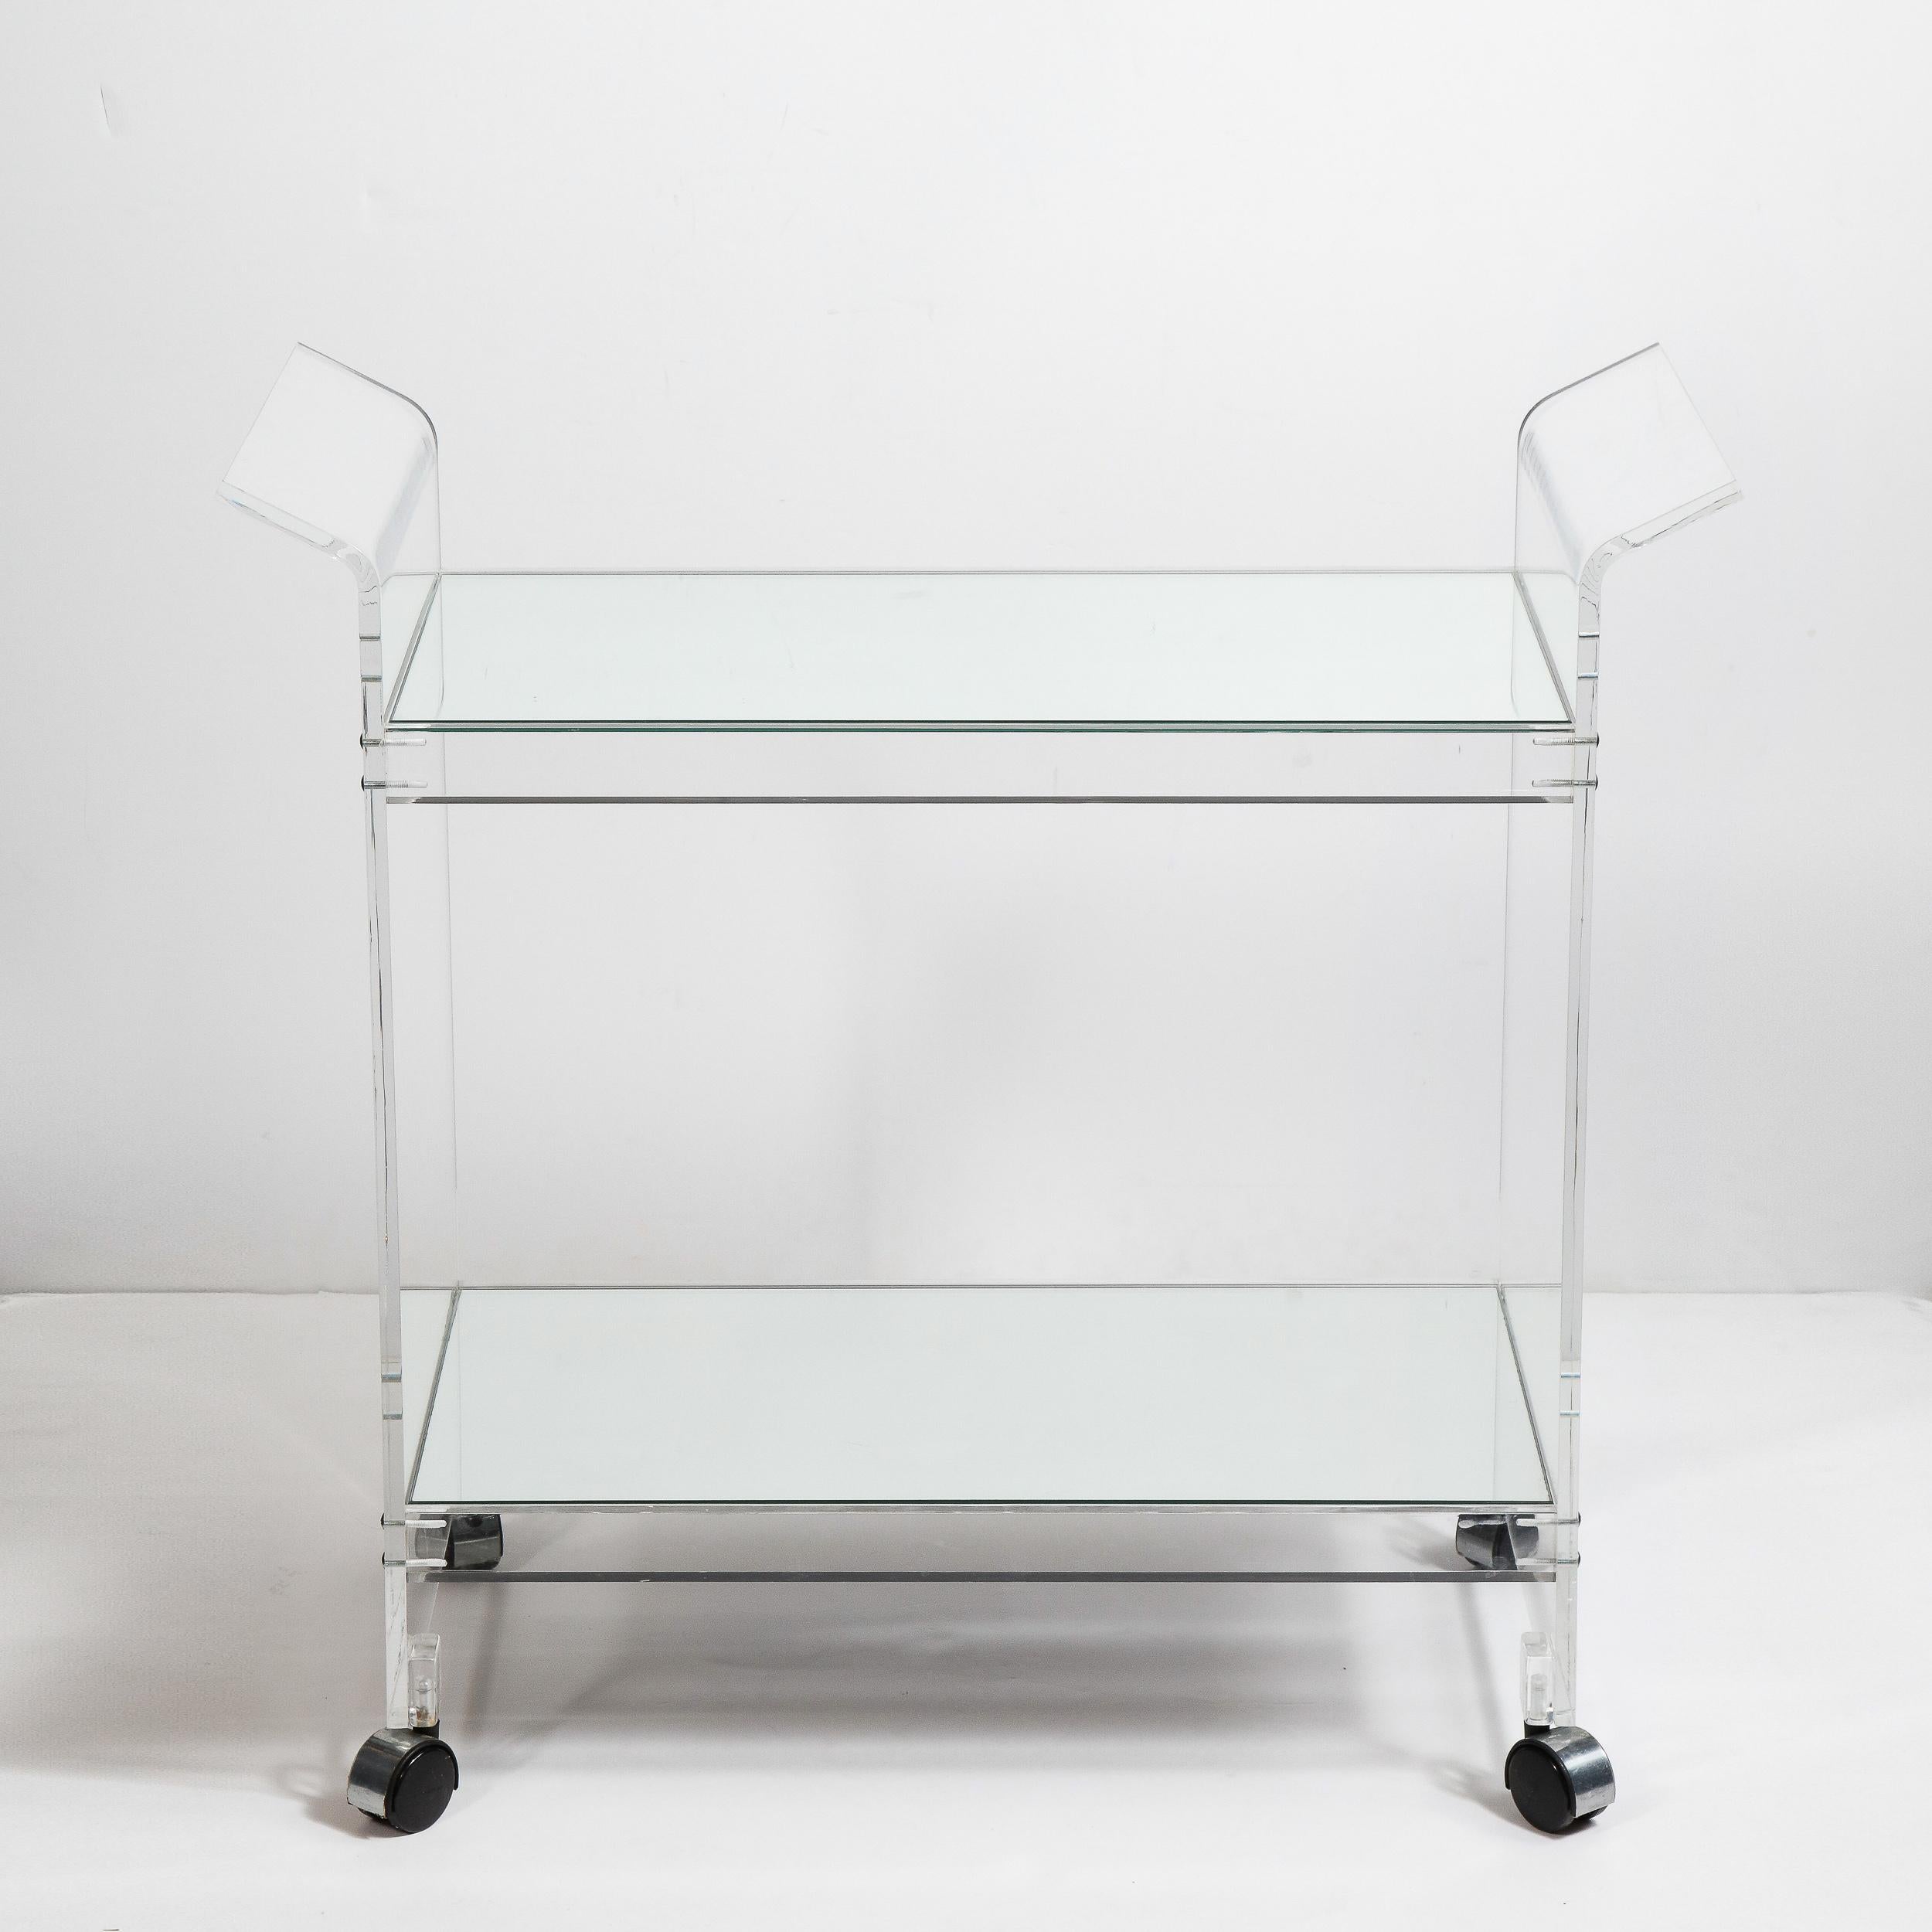 This chic and refined Mid-Century Modern bar cart was realized in the United States, circa 1970. Fabricated in translucent Lucite and sitting on chrome wrapped castors, this piece consists of two side supports with stylized wing detailing at their